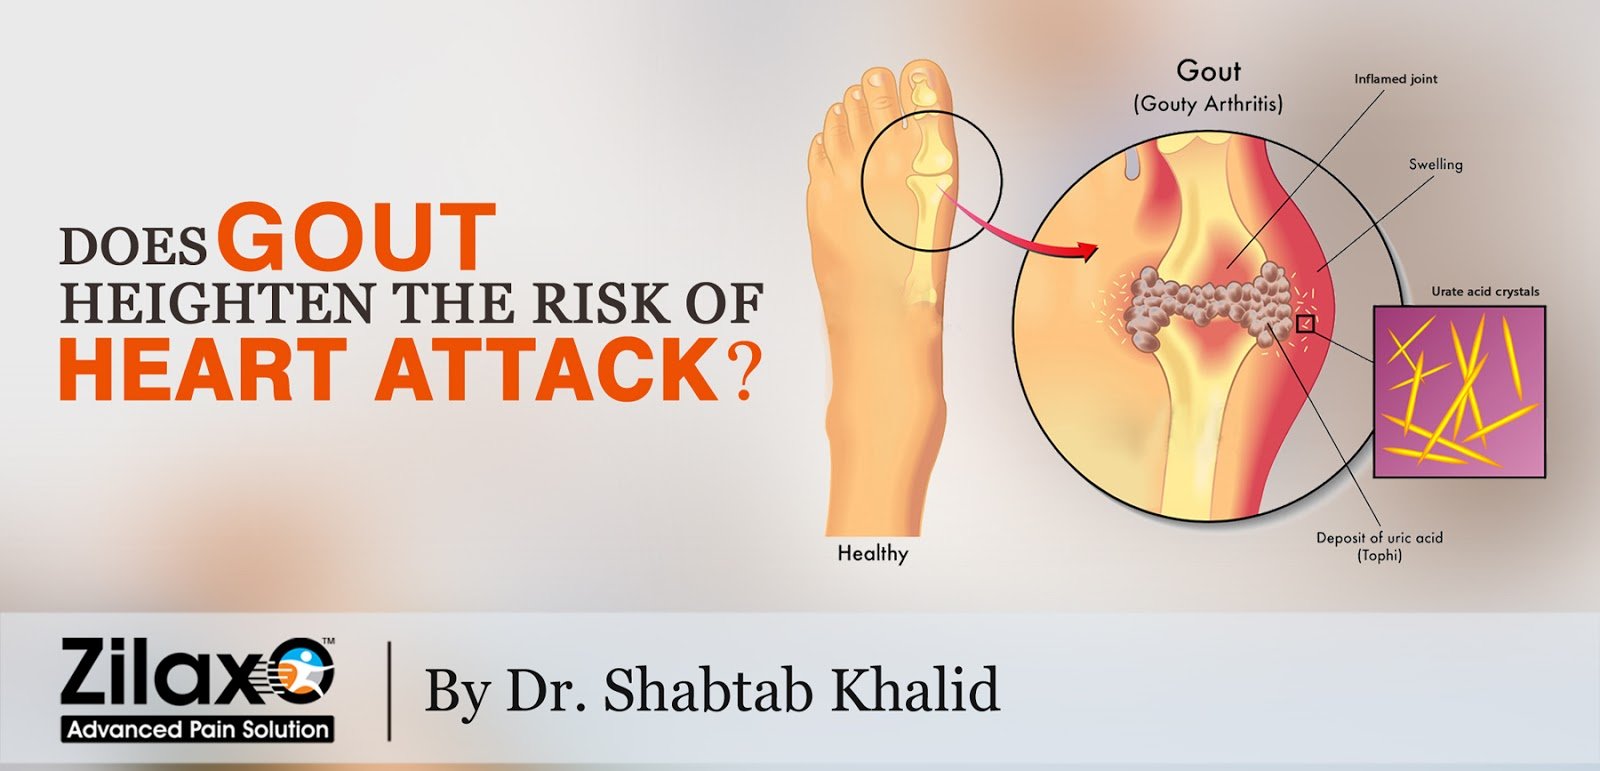 Zilaxo Advanced Pain Solution: Does Gout Heighten The Risk ...